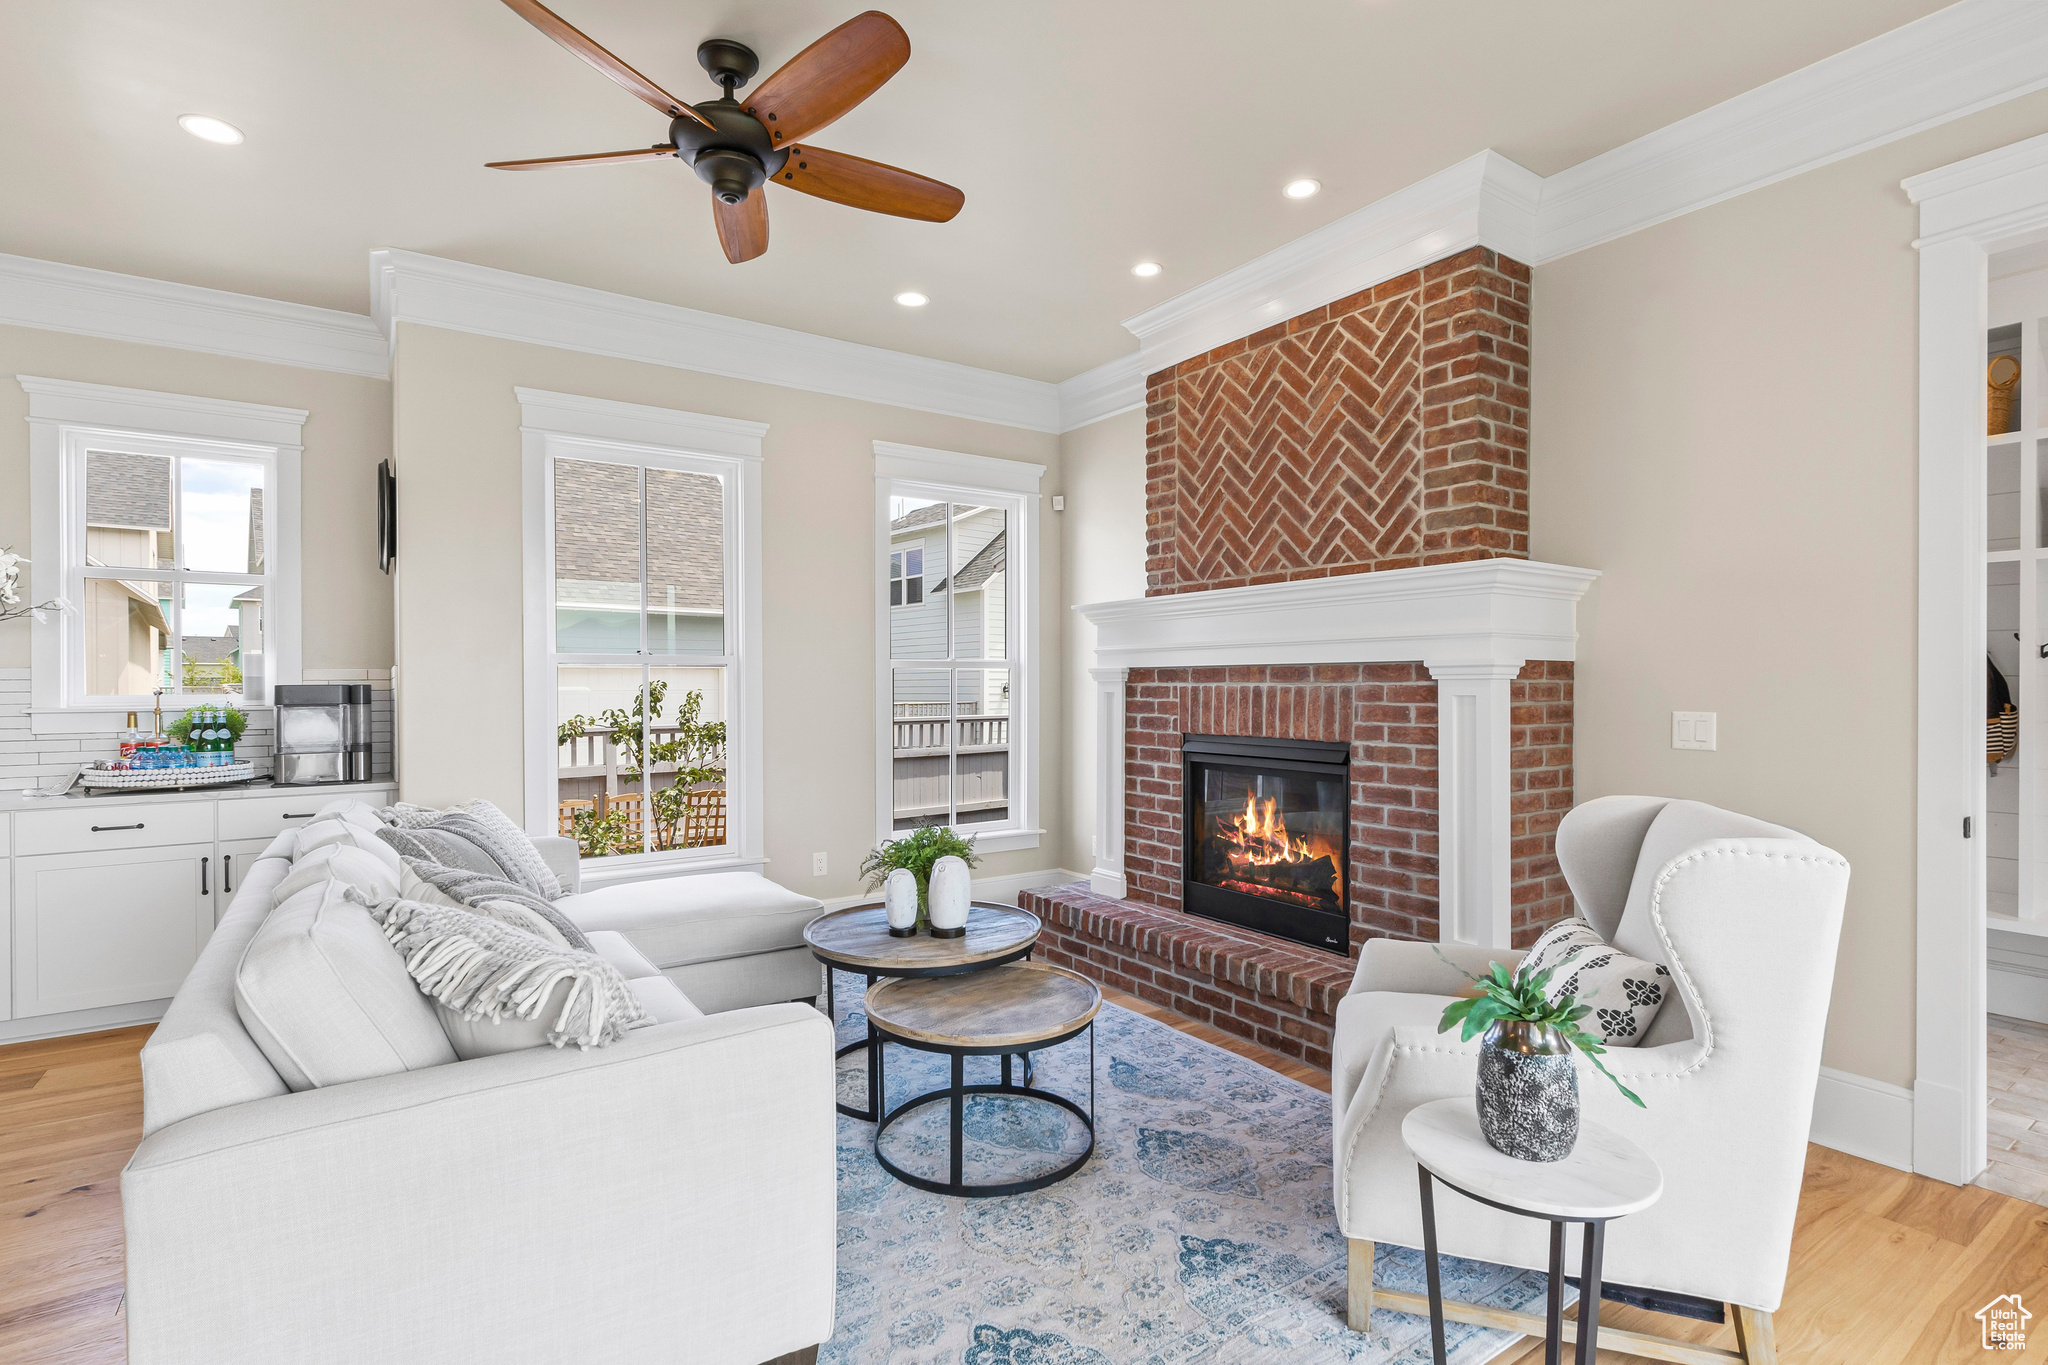 Living room with crown molding, light wood-type flooring, a brick fireplace, and ceiling fan